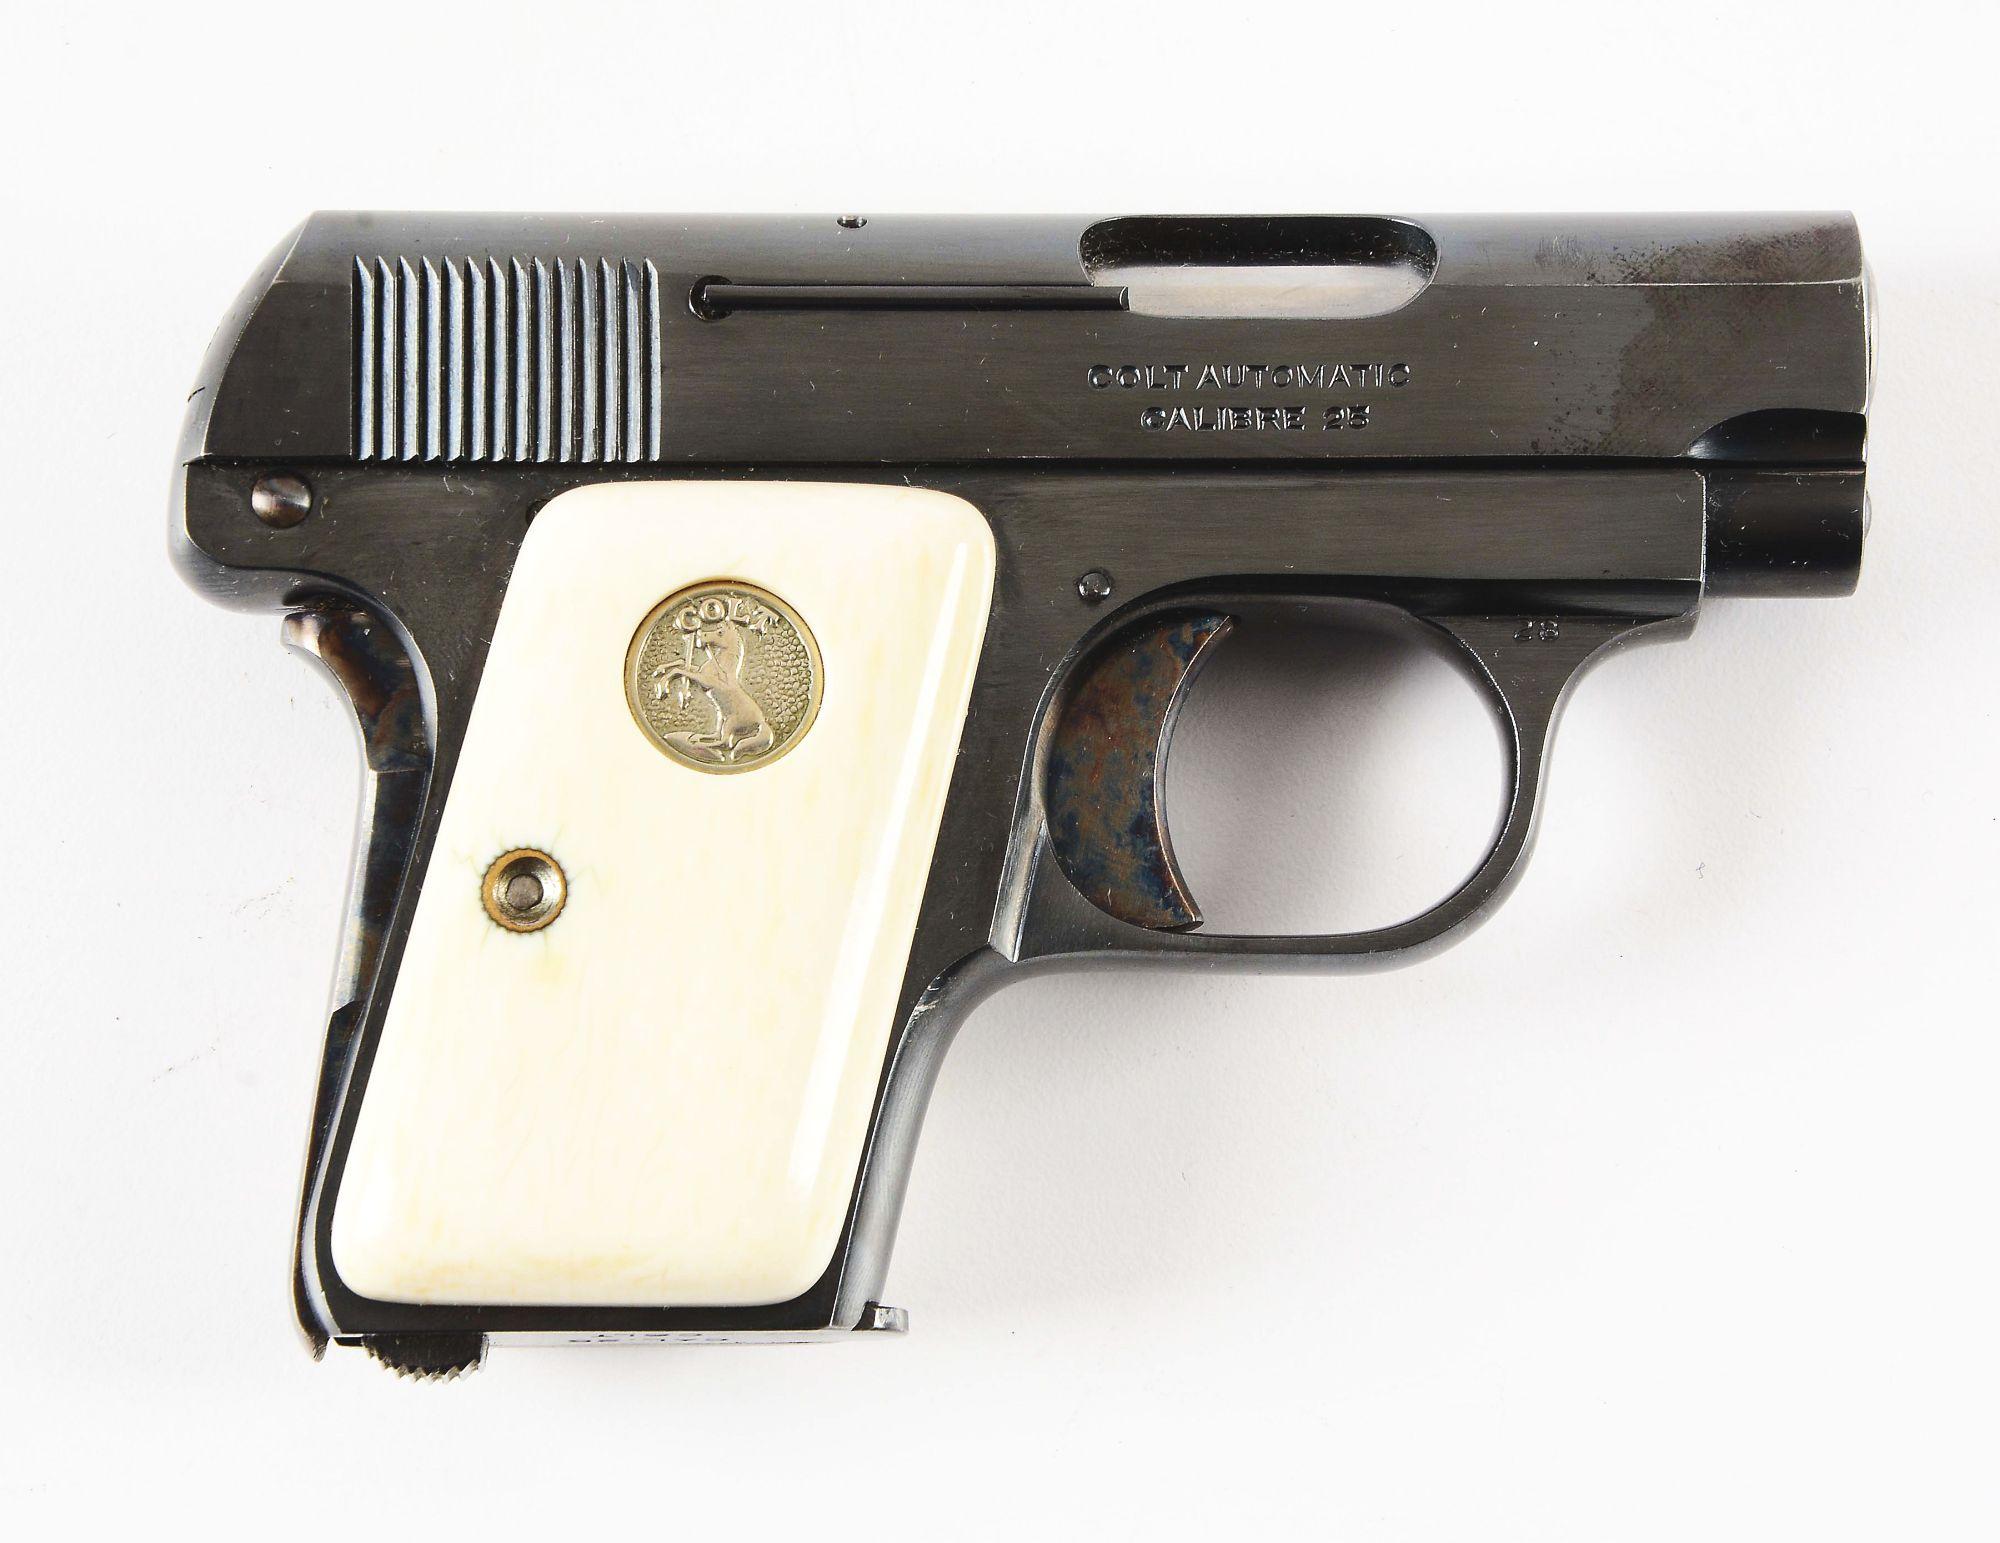 (C) Boxed Colt Model 1908 Semi-Automatic Pocket Pistol with Silver Medallion Ivory Grips (1920).